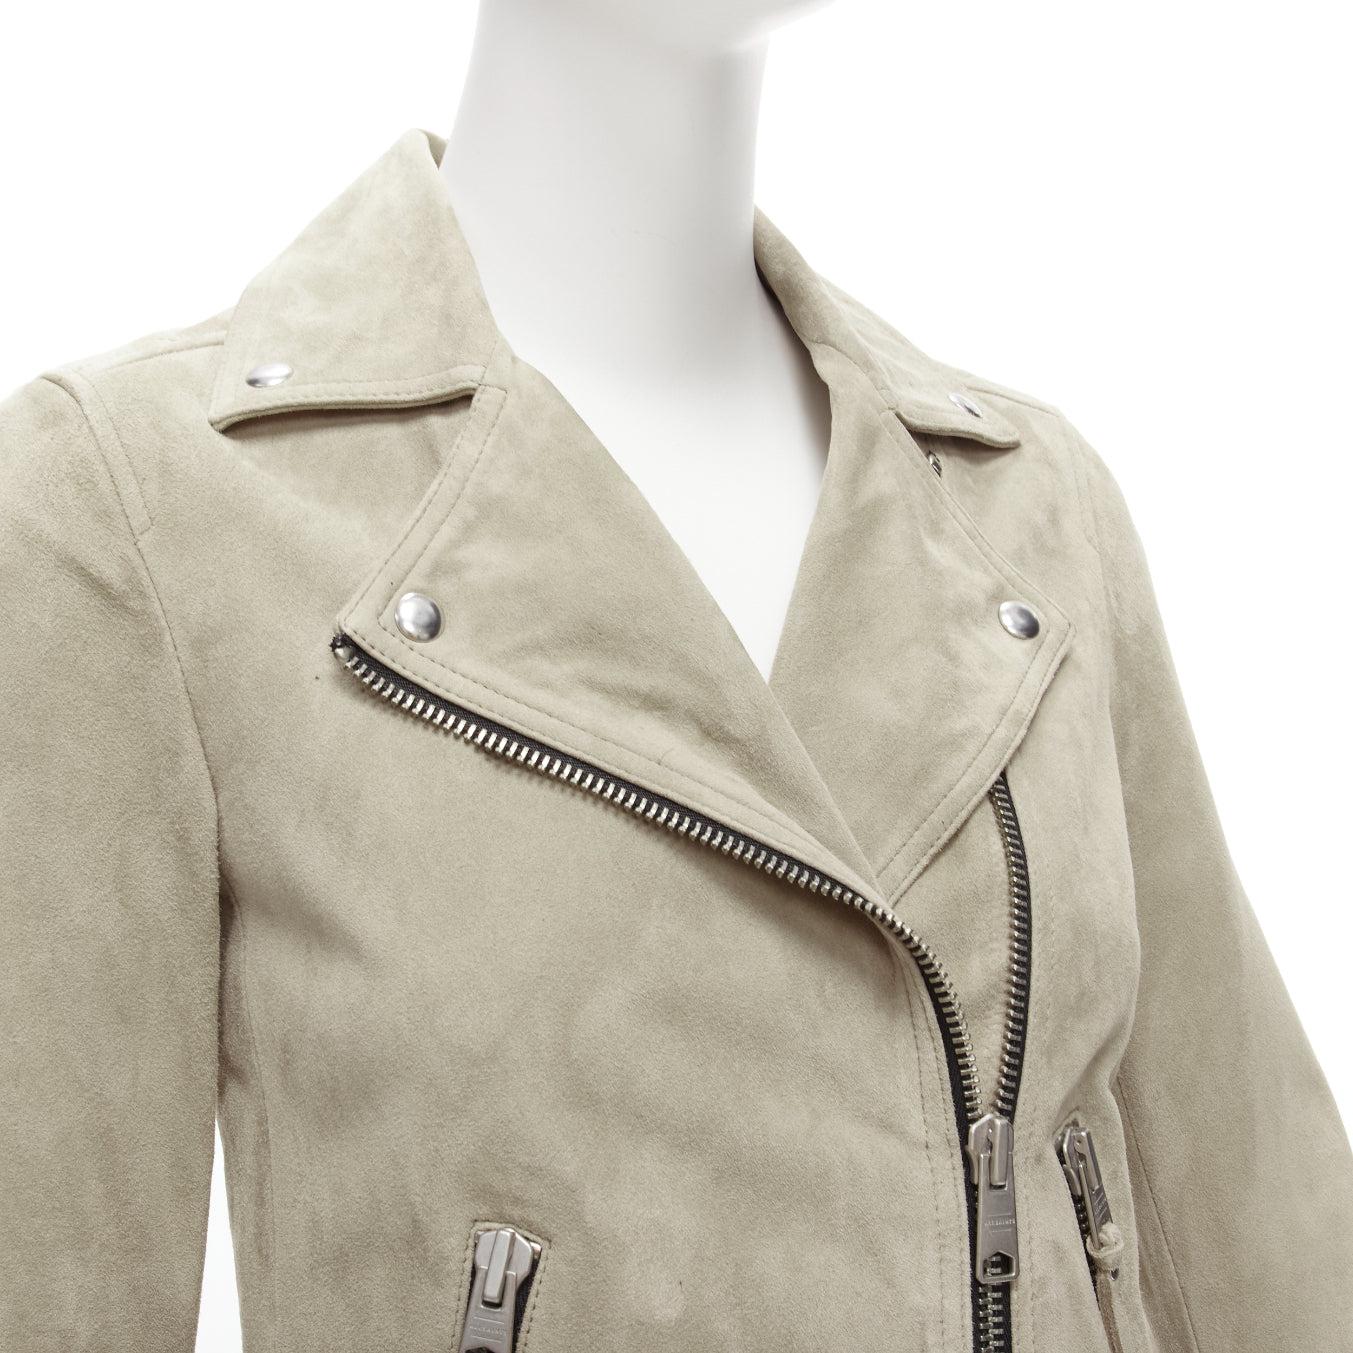 ALL SAINTS Dalby grey goat suede leather silver hardware classic biker jacket UK6 XS
Reference: SNKO/A00256
Brand: All Saints
Model: Dalby
Material: Suede
Color: Beige
Pattern: Solid
Closure: Zip
Lining: Beige Fabric
Extra Details: Yoke and panels